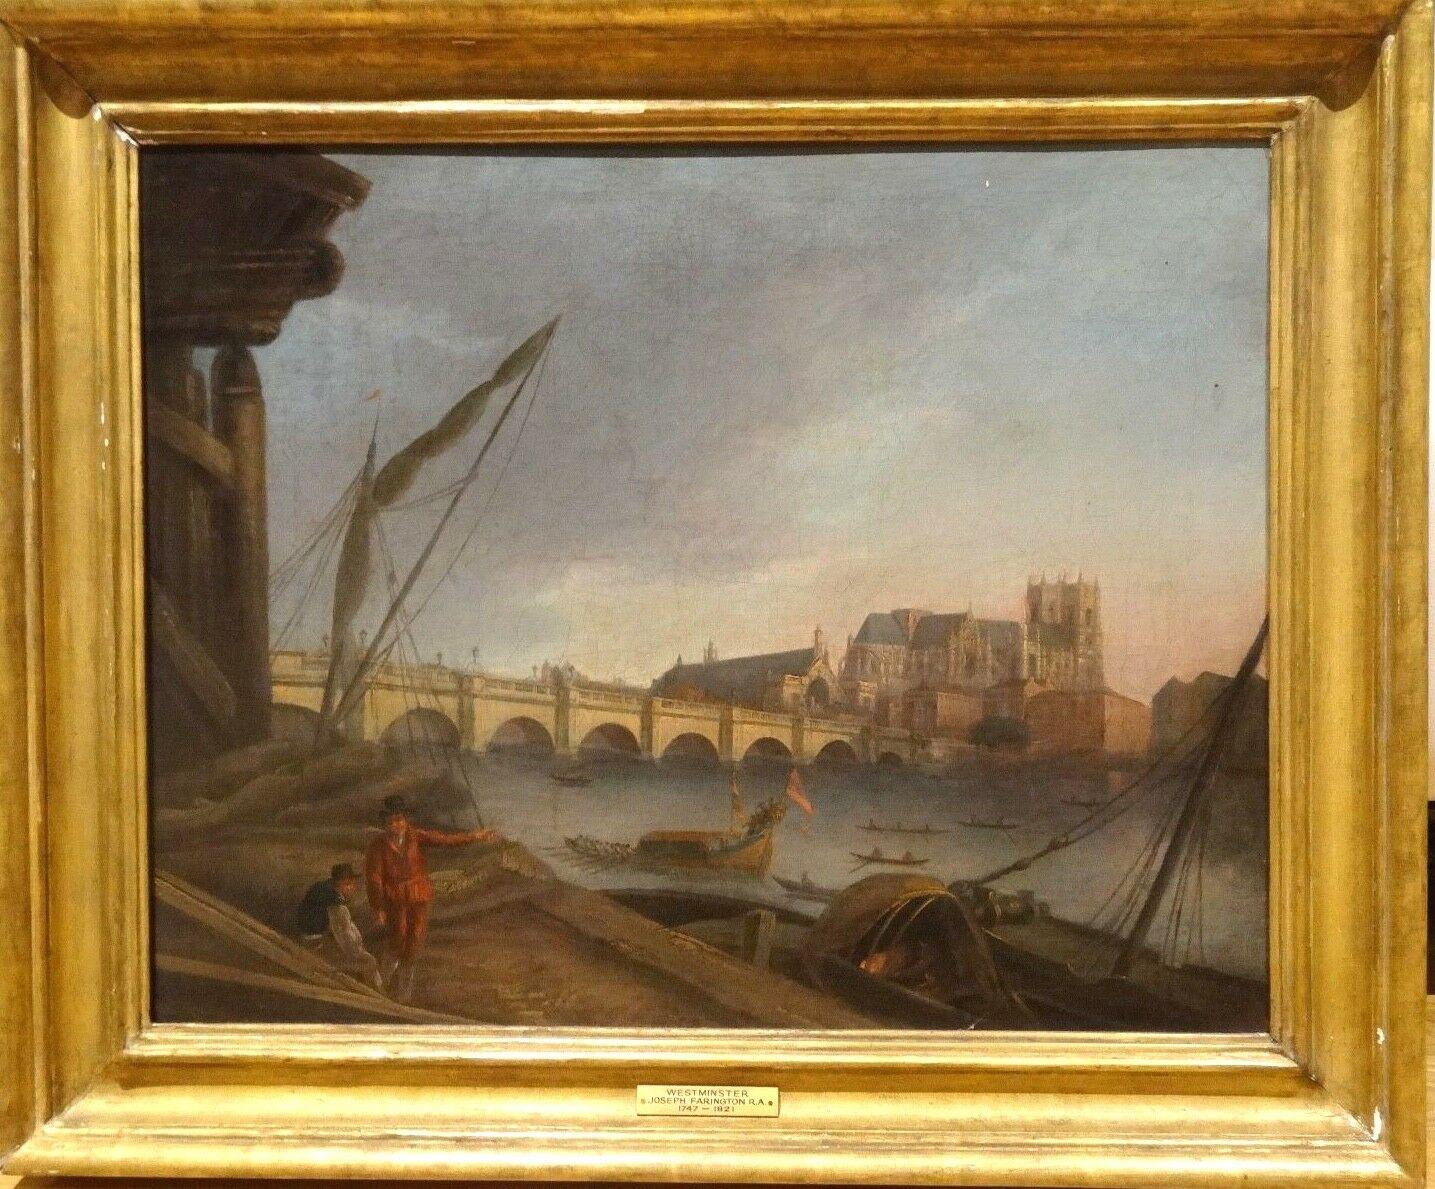 Joseph FARINGTON Landscape Painting - Westminster From The South, 18th Century